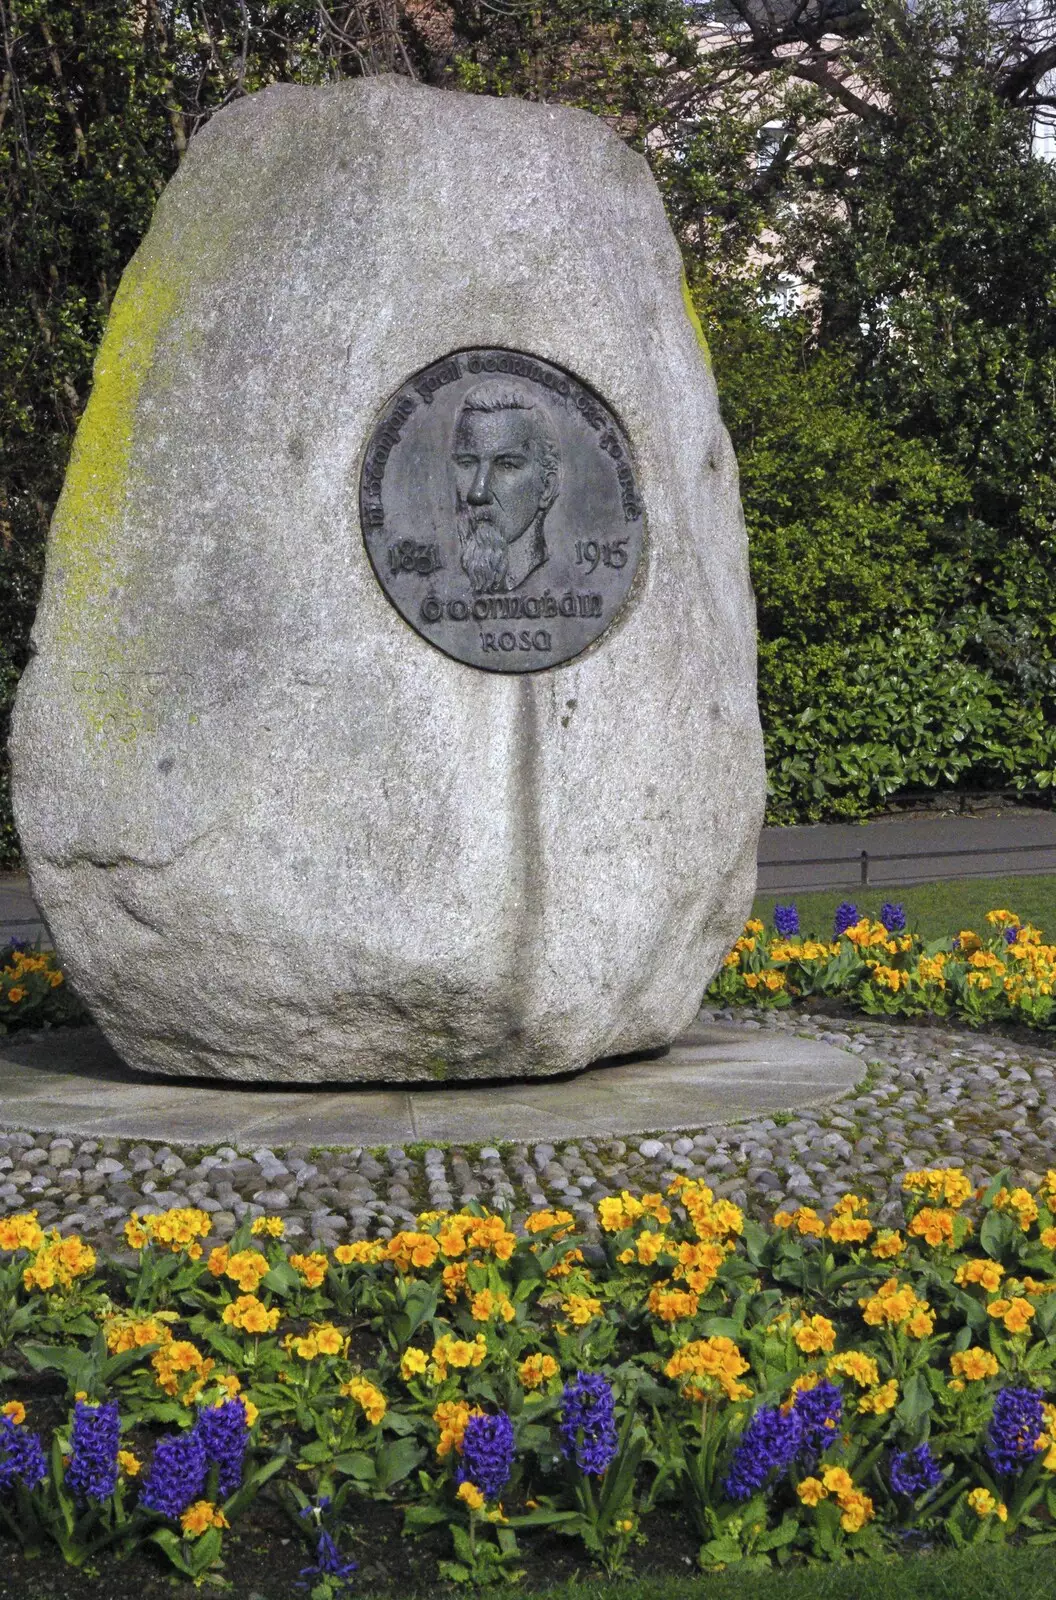 A rock memorial in the park, from Easter in Dublin, Ireland - 21st March 2008